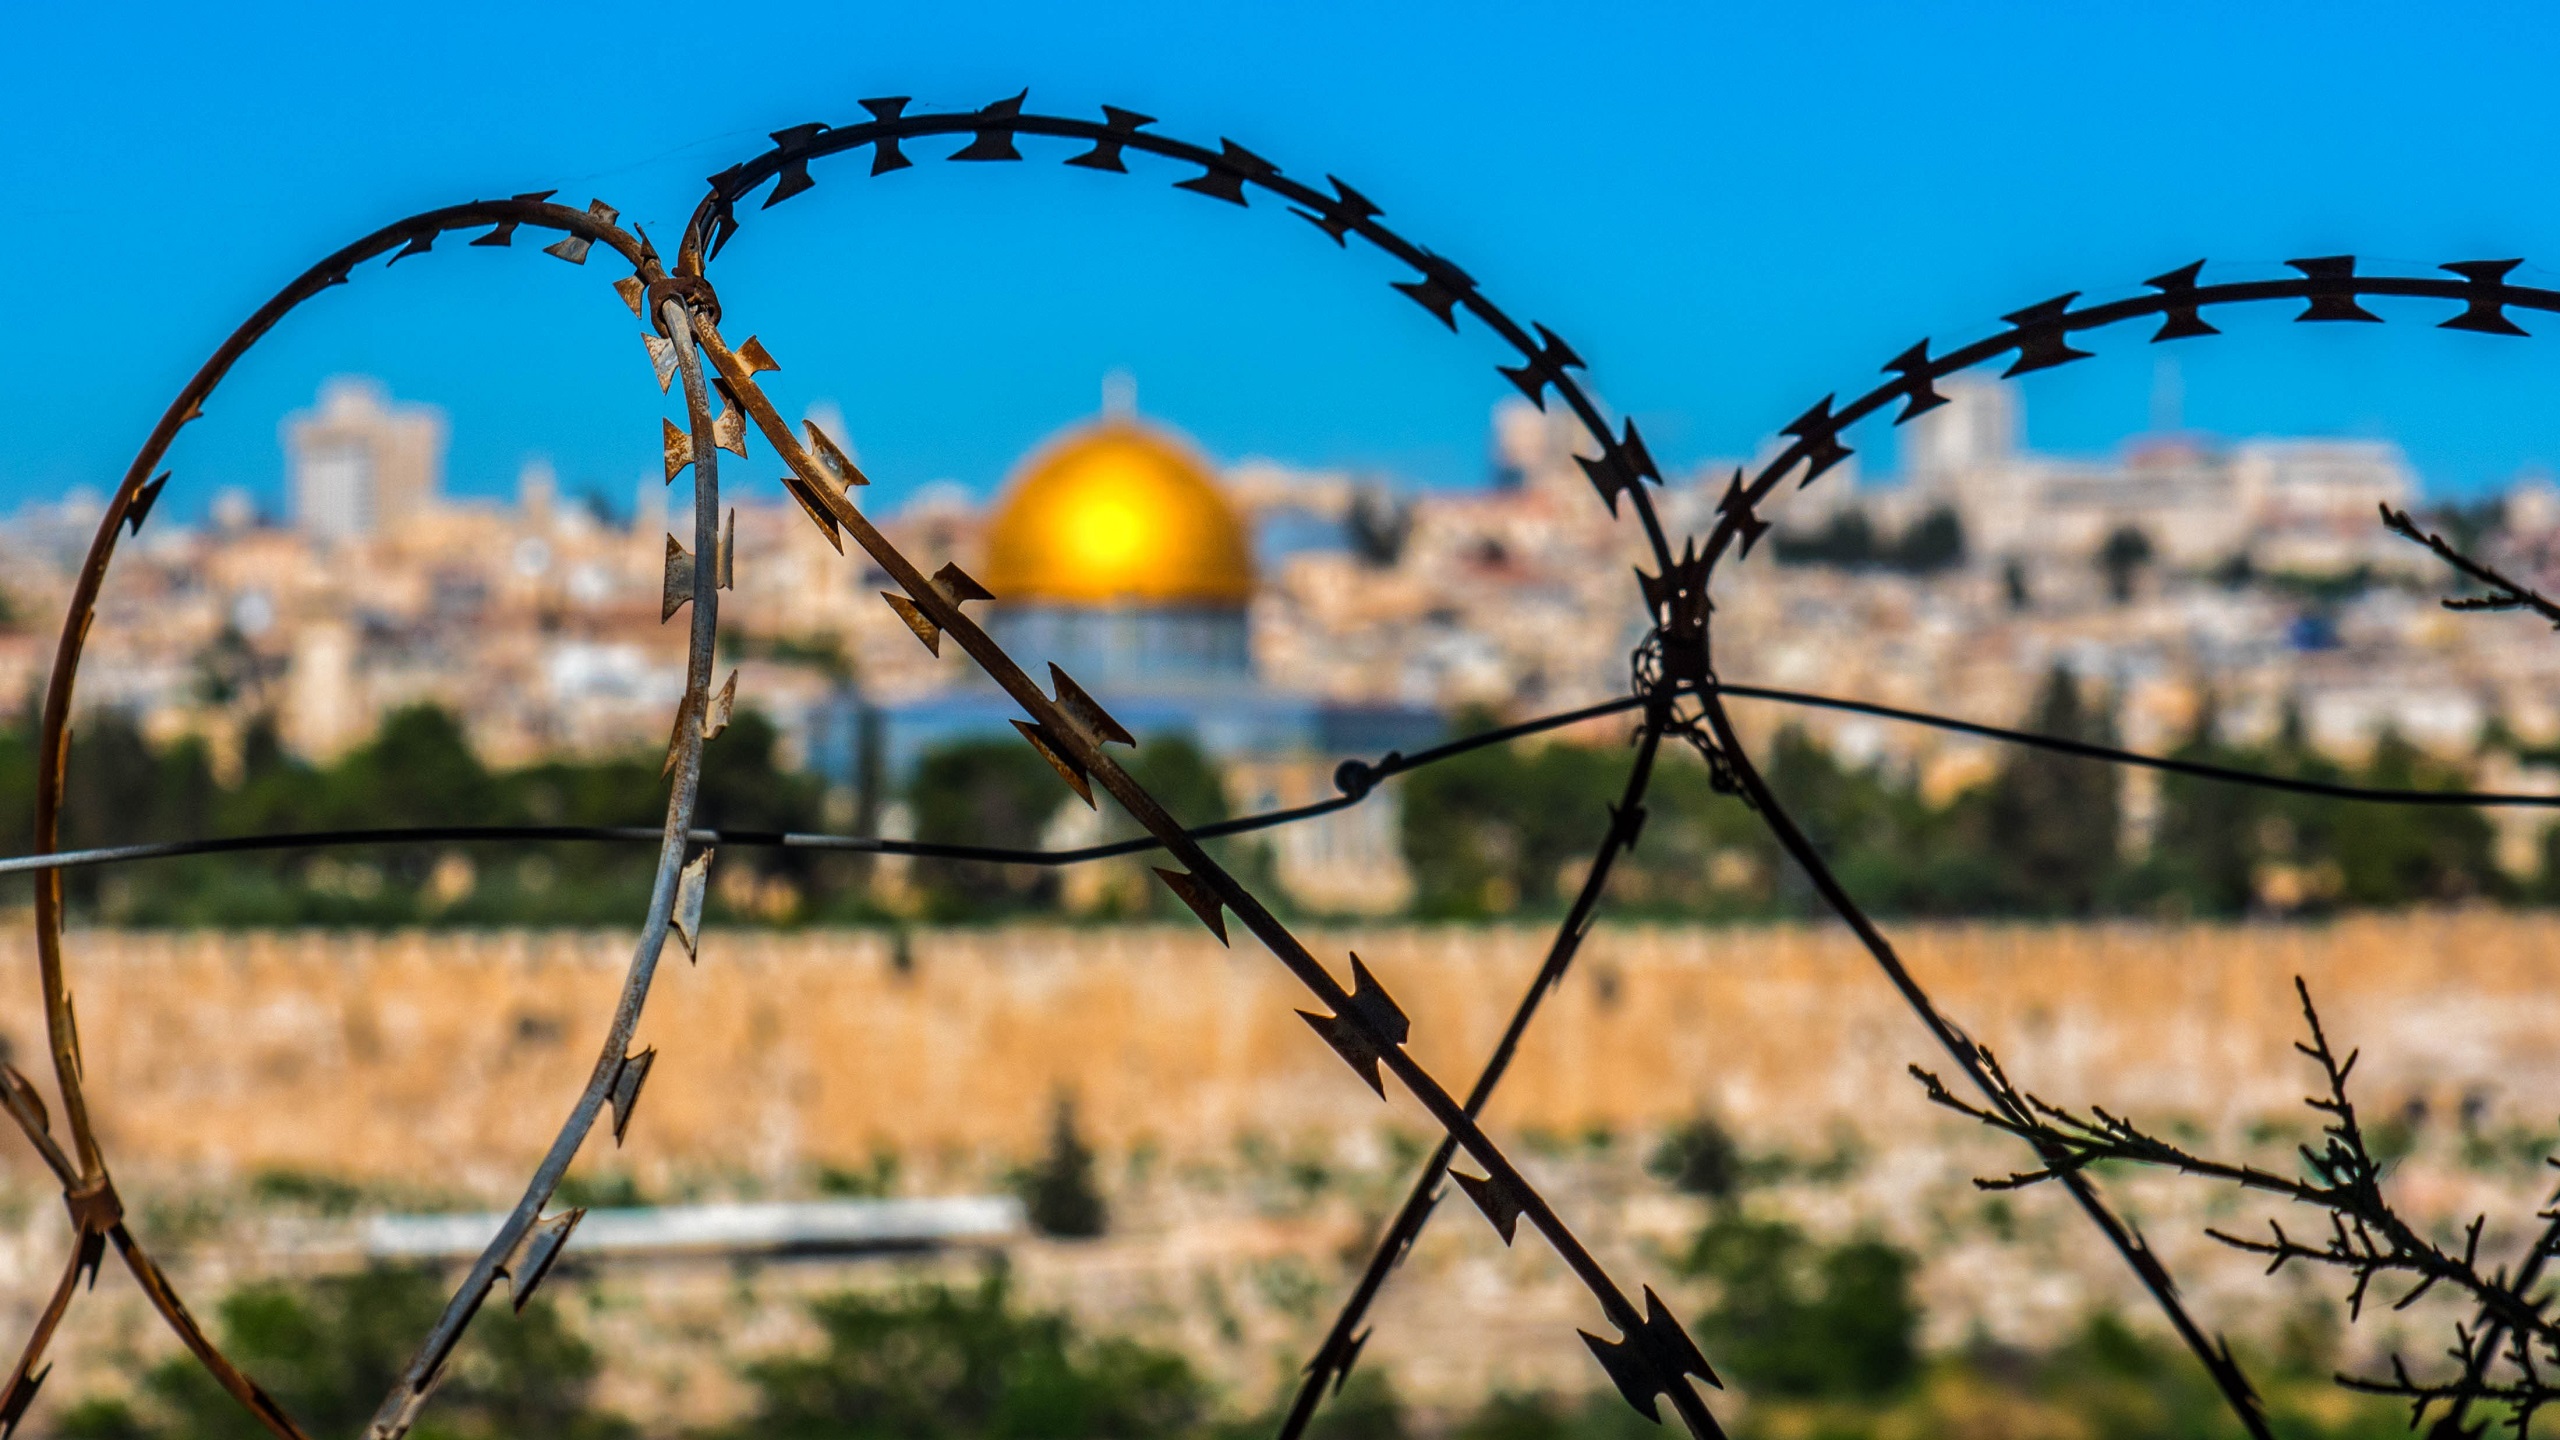 The Battle for Jerusalem Continues, the Conflict in Microcosm